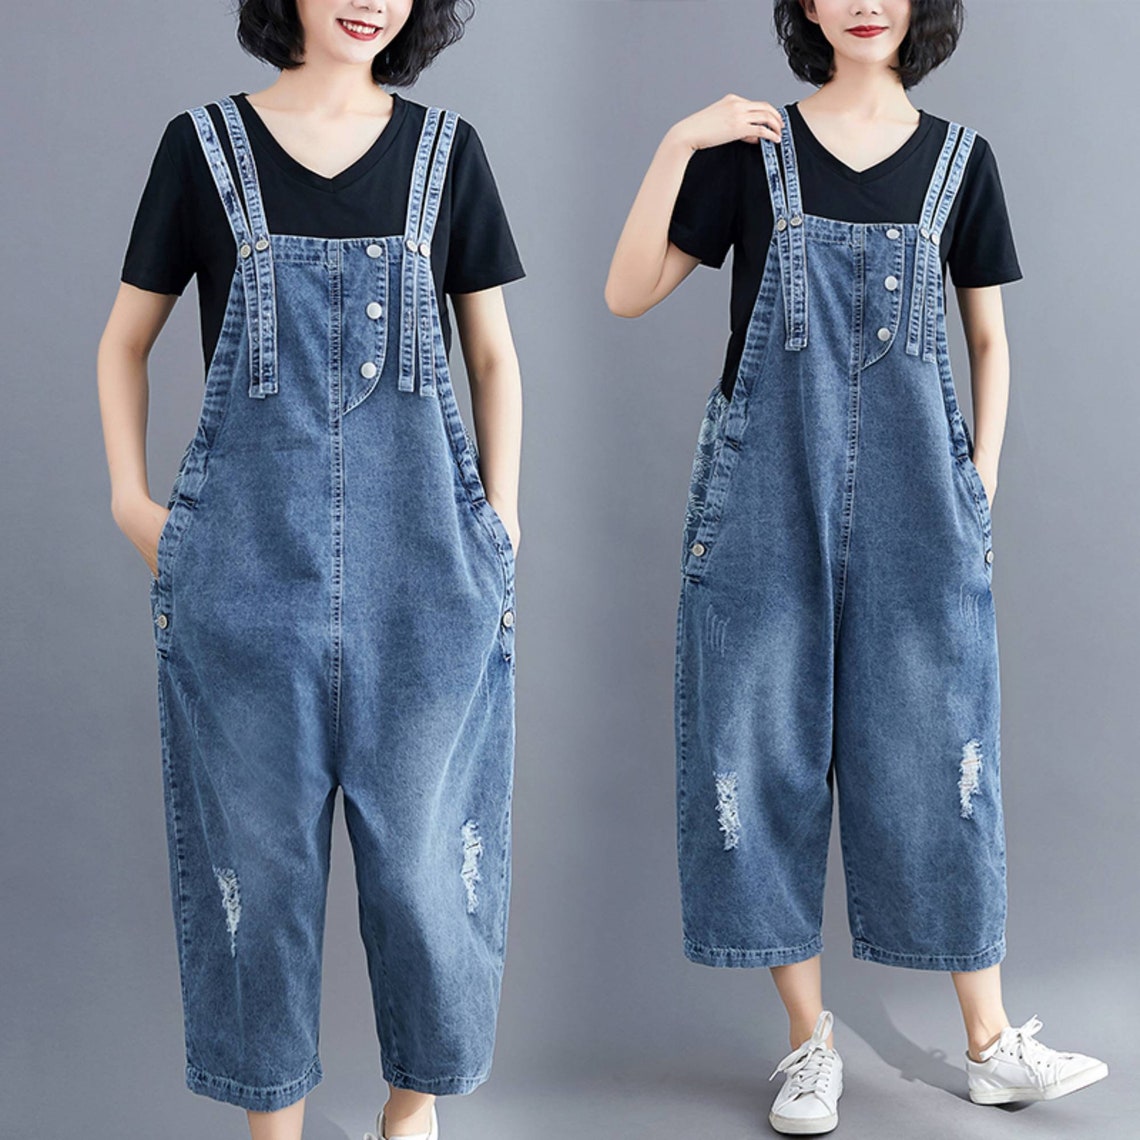 Wash Denim Overalls Baggy Jeans Jumpsuits Wide Leg Overall | Etsy